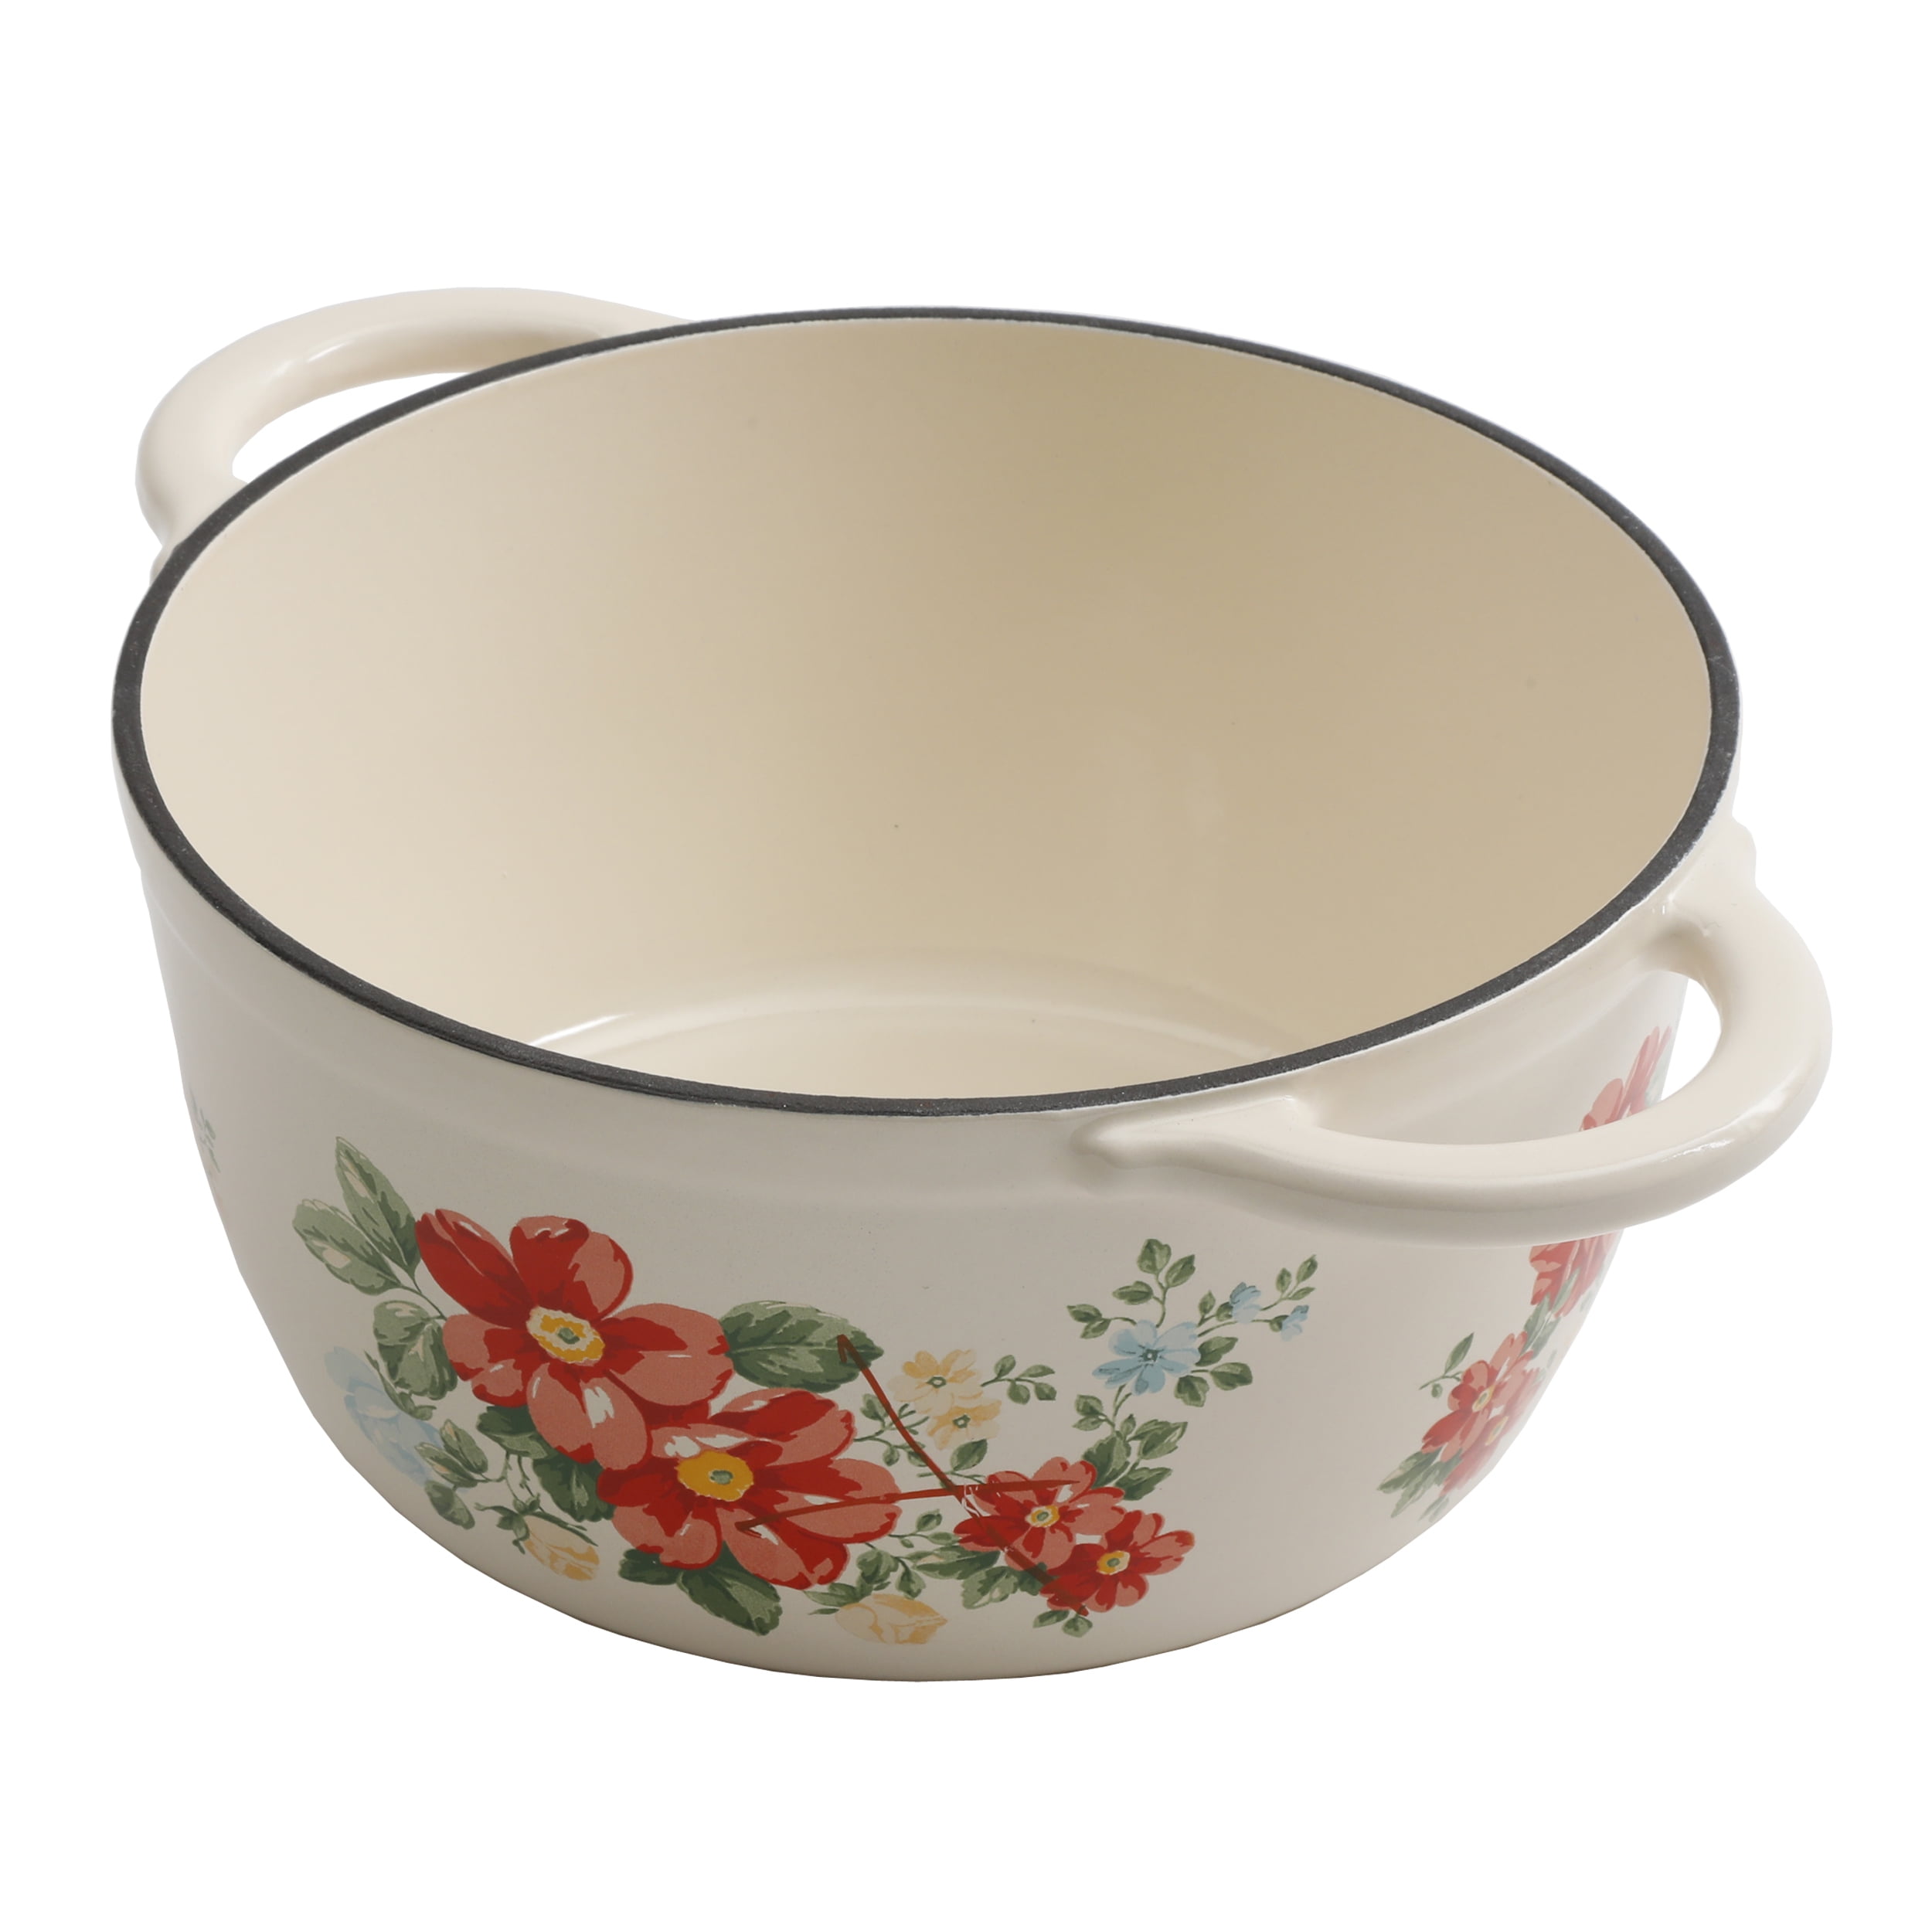 The Pioneer Woman Timeless Beauty Floral Shaped 3-Quart Enamel